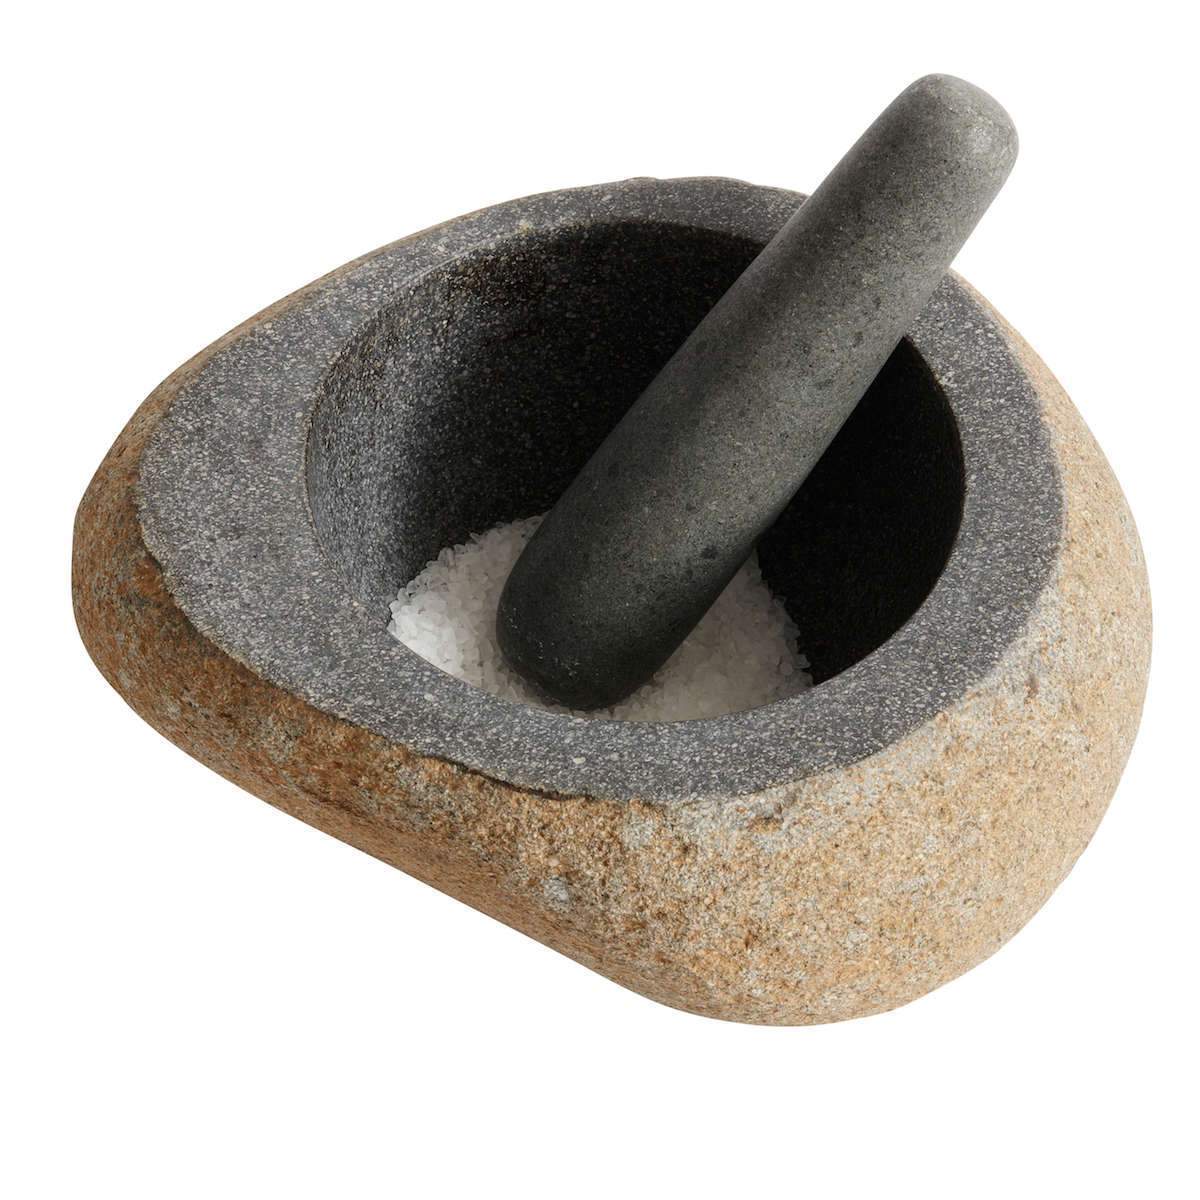 MUUBS Valley Mortar Riverstone, 18 cm